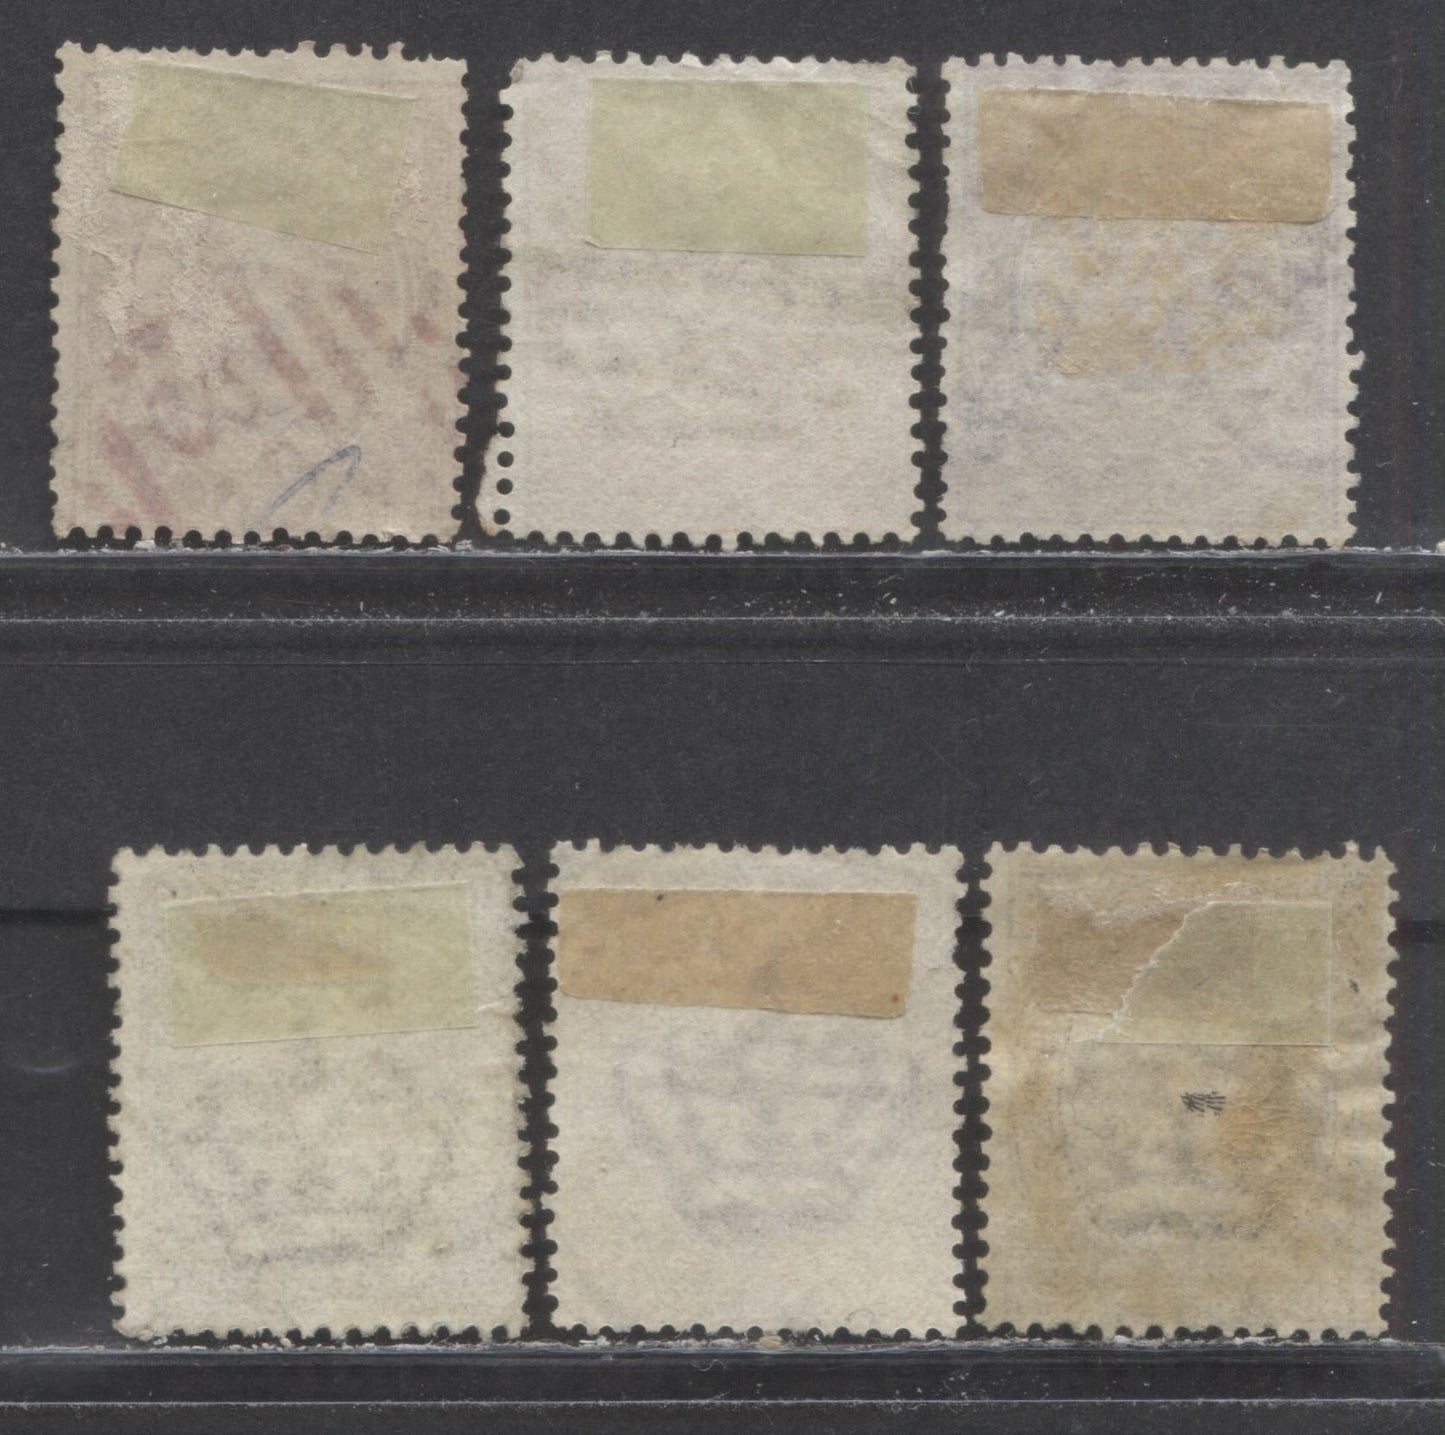 Lot 380 Italy SC#46/56 1879-1889 Humbert Definitive, 6 Very Good Used Singles, Click on Listing to See ALL Pictures, Estimated Value $25 USD